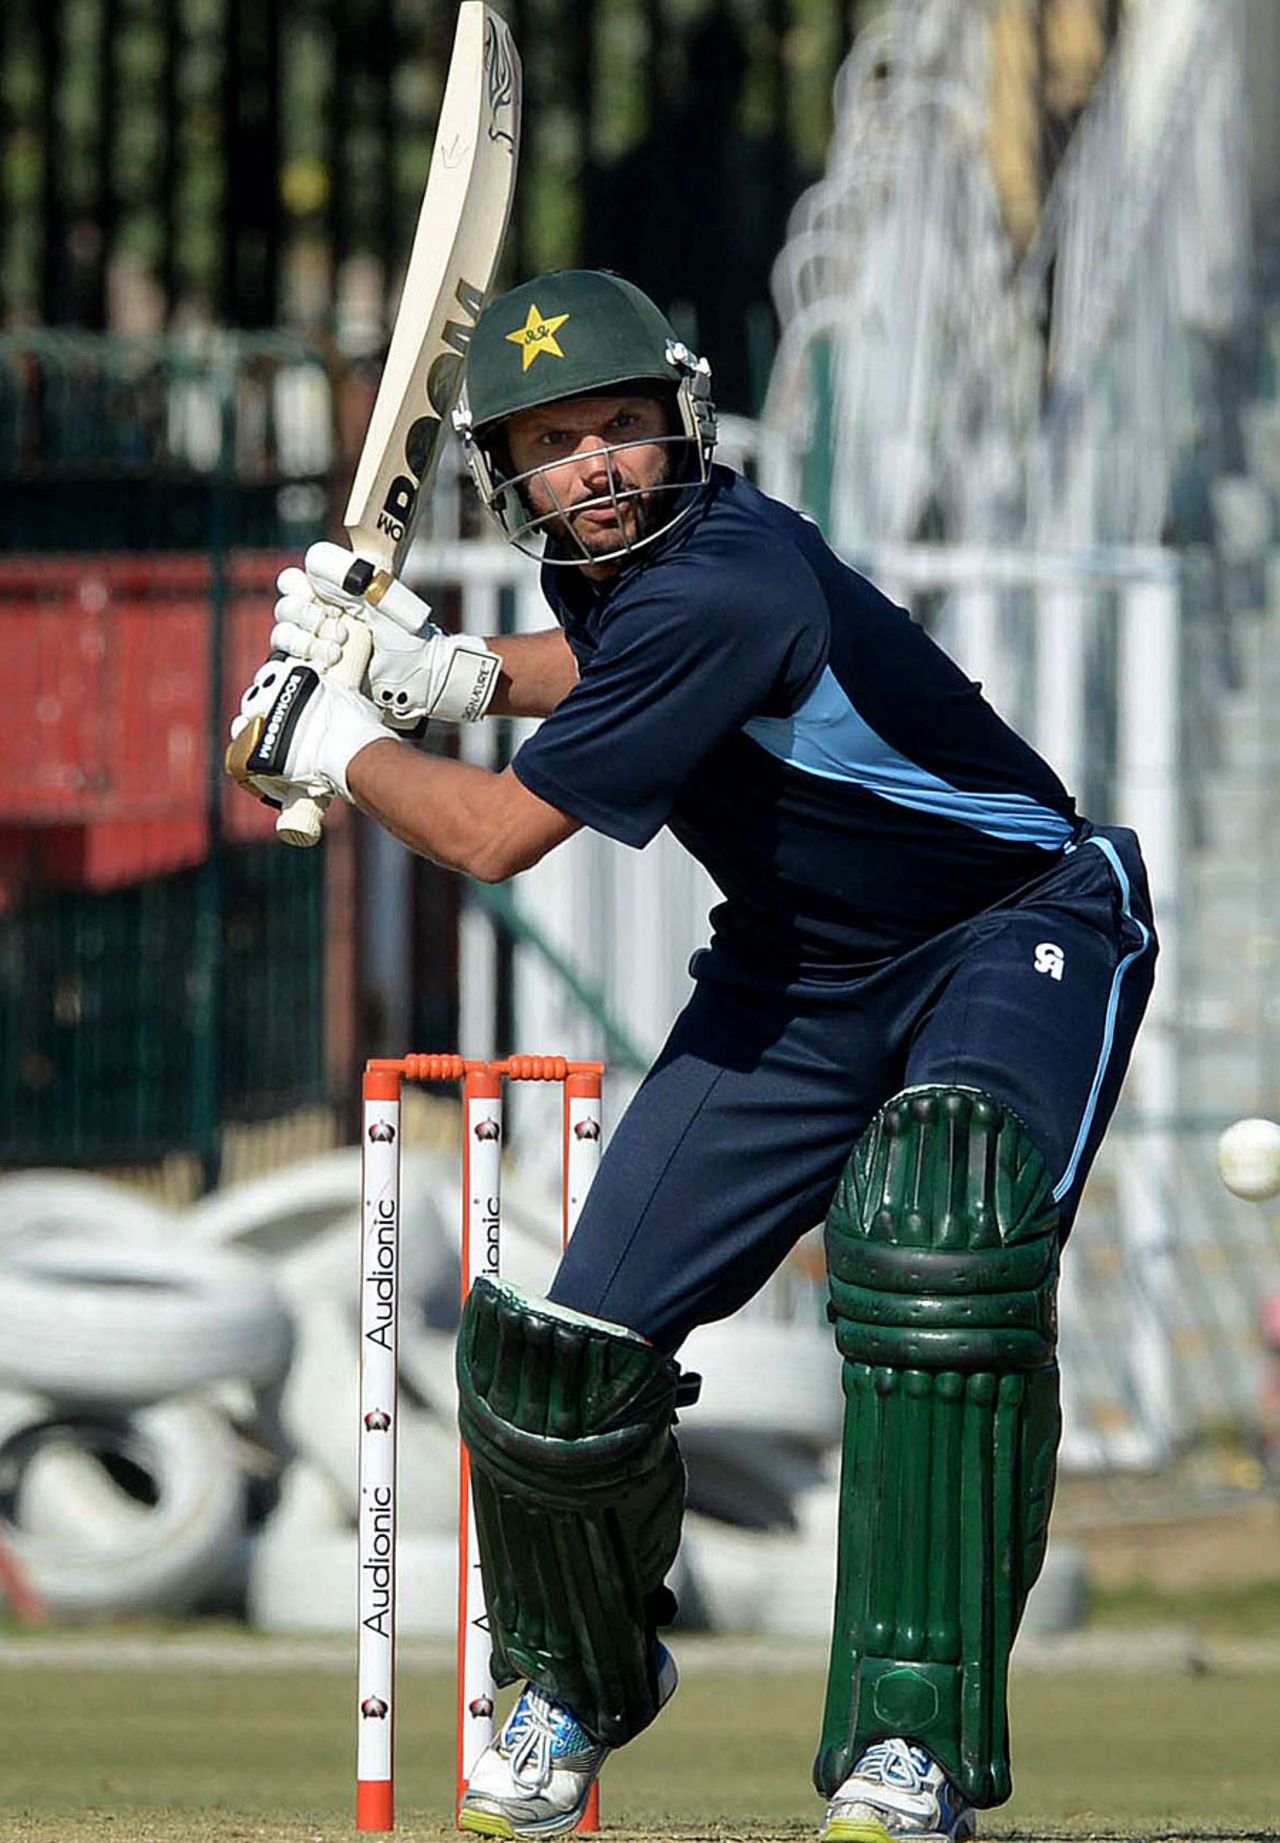 Shahid Afridi goes for a big hit, Lahore, December 19, 2012